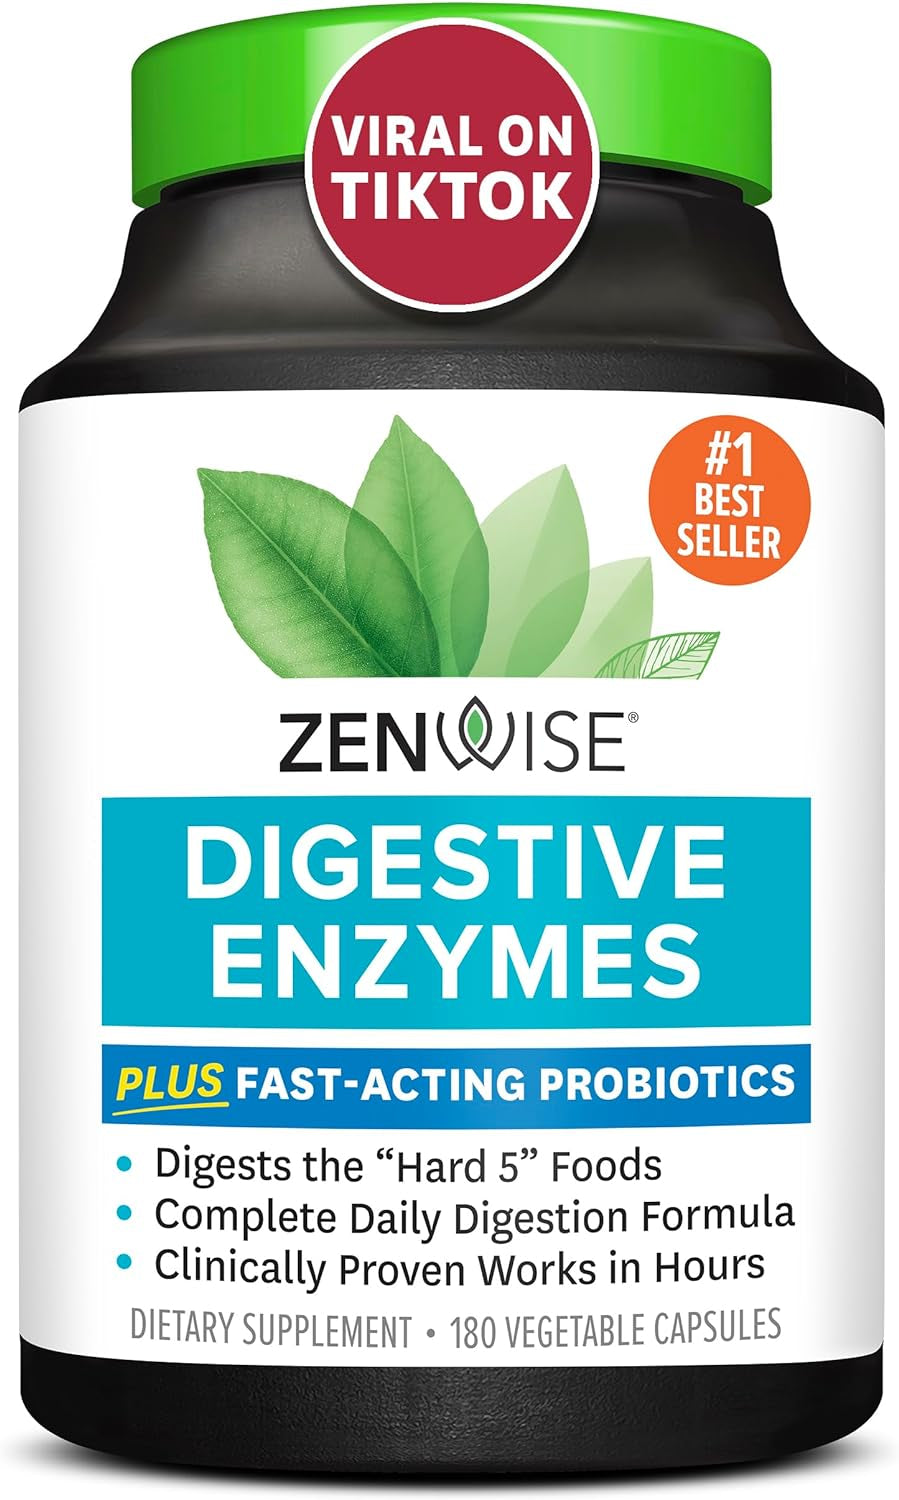 "Digestive Harmony: Probiotic Enzyme Blend for Gut Health - 180 Capsules"